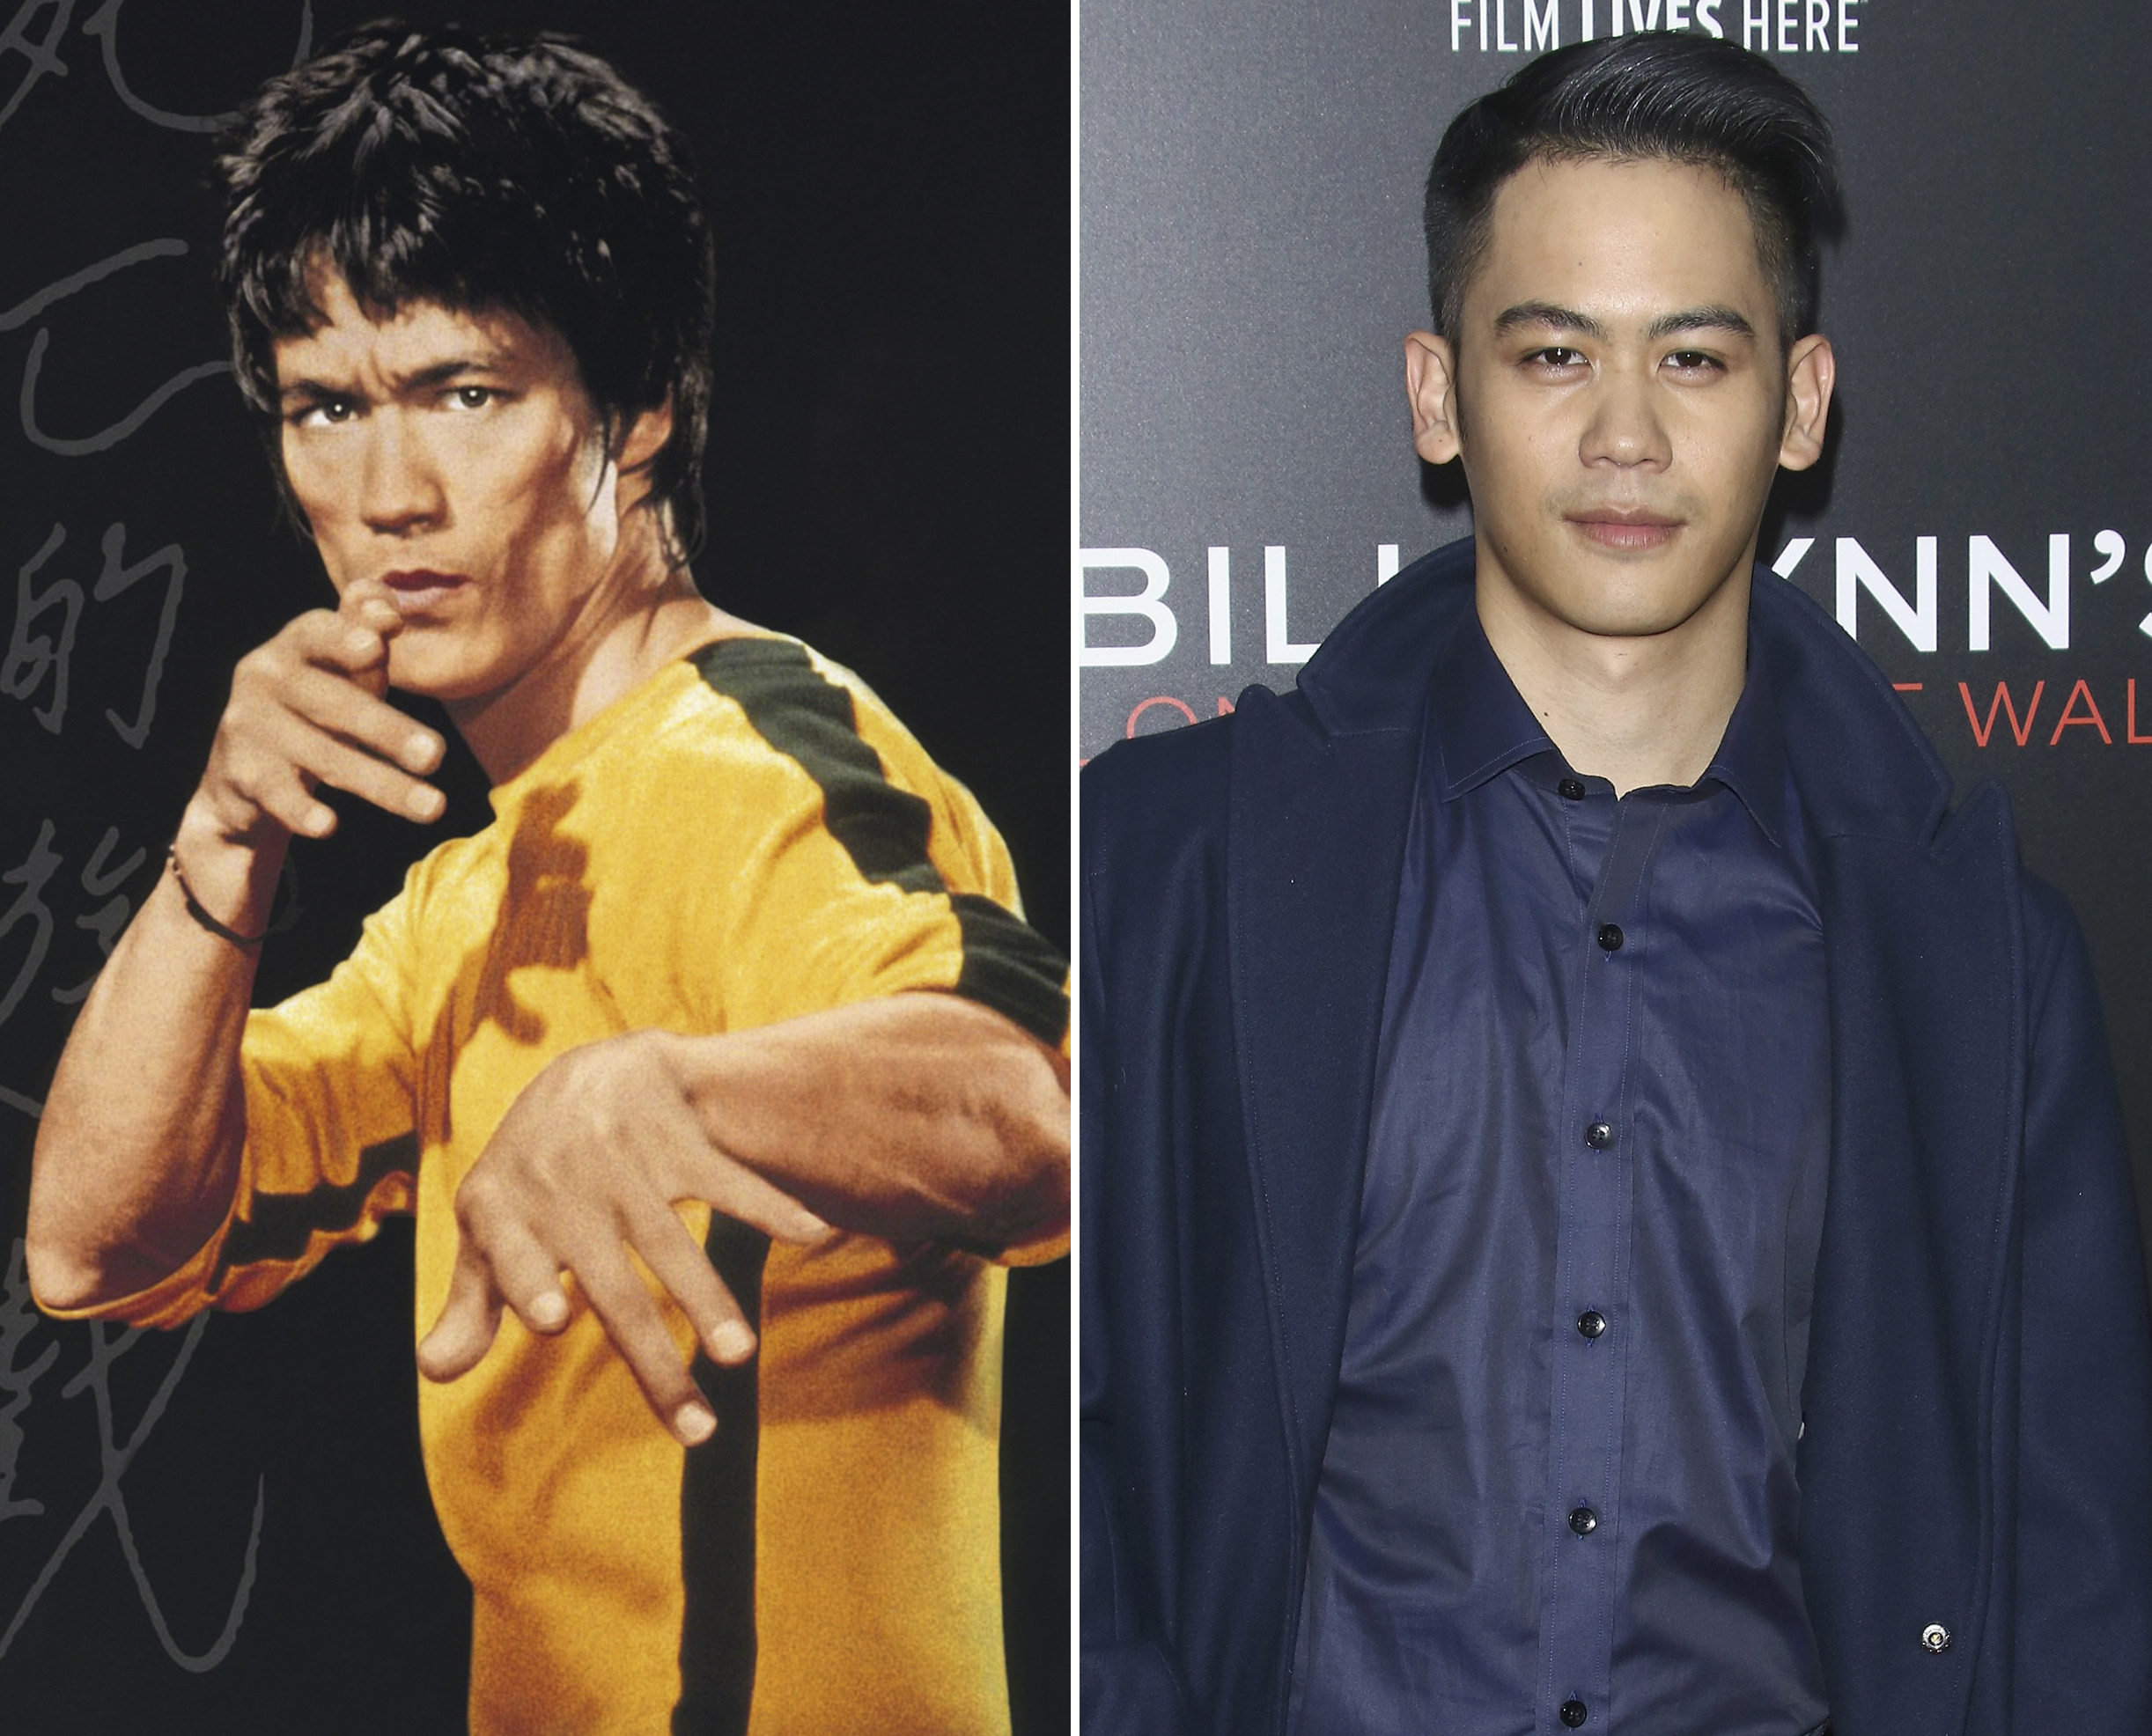 Bruce Lee (above, left) will be played in Ang Lee’s biopic by the director’s son Mason Lee (above, right), it was revealed this week. Other well known directors have cast family members in their movies. Photo: Getty Images